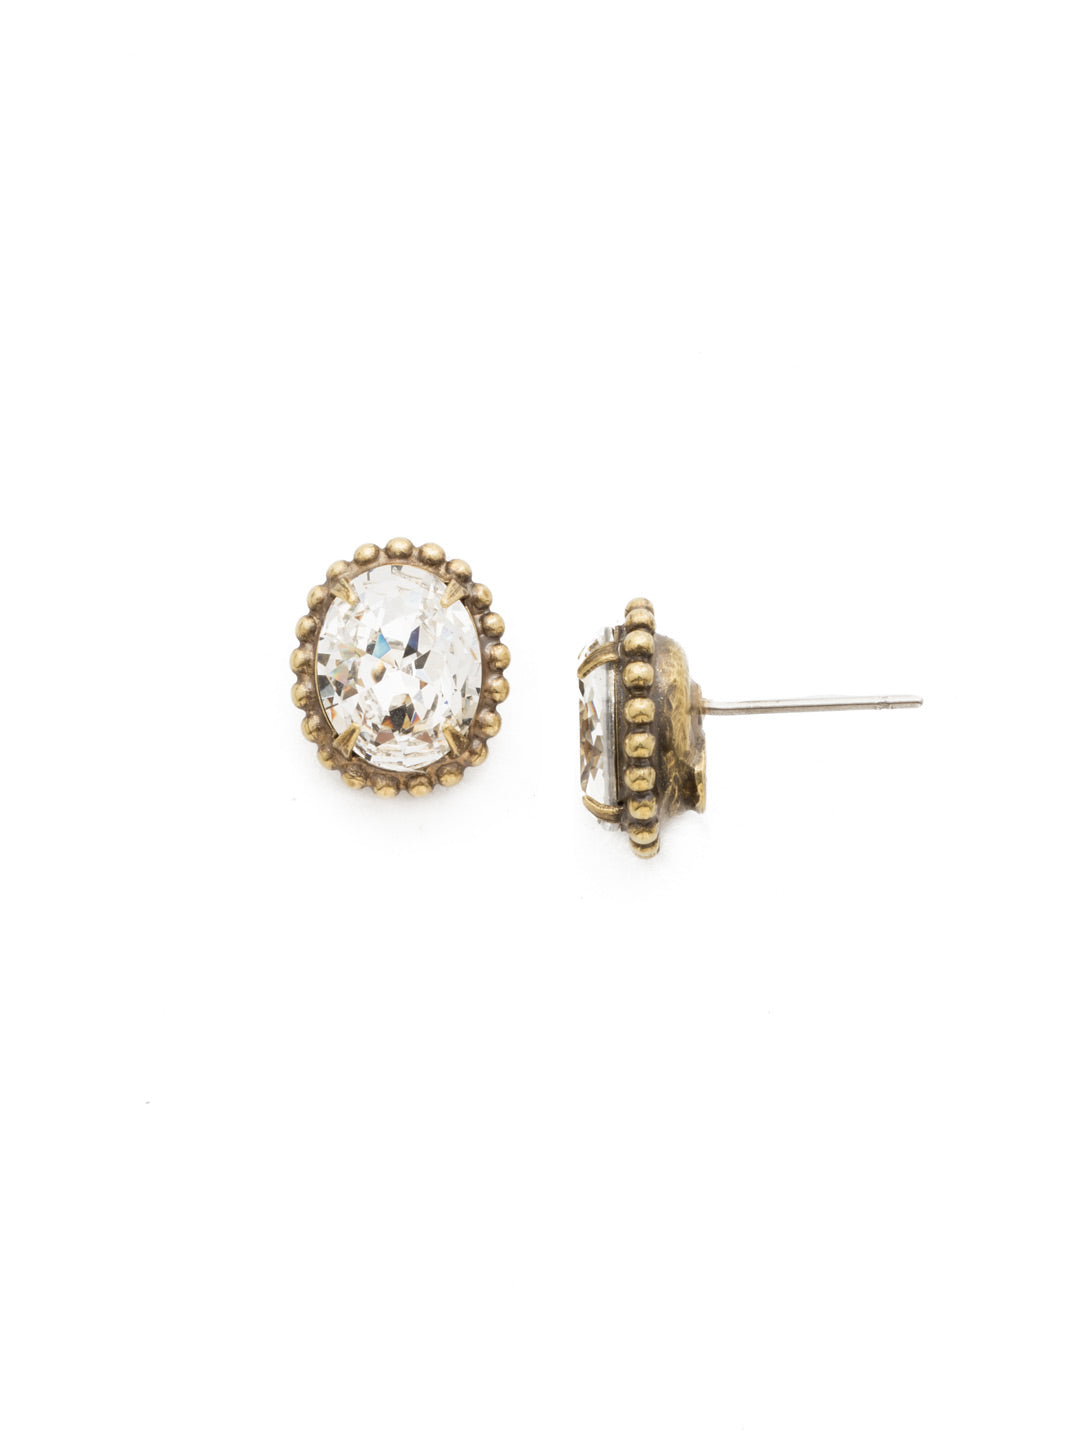 Oval-Cut Solitaire Stud Earrings - EDQ10AGCRY - <p>These simple stud earrings feature a beautiful oval crystal surrounded by a decorative edged border. From Sorrelli's Crystal collection in our Antique Gold-tone finish.</p>